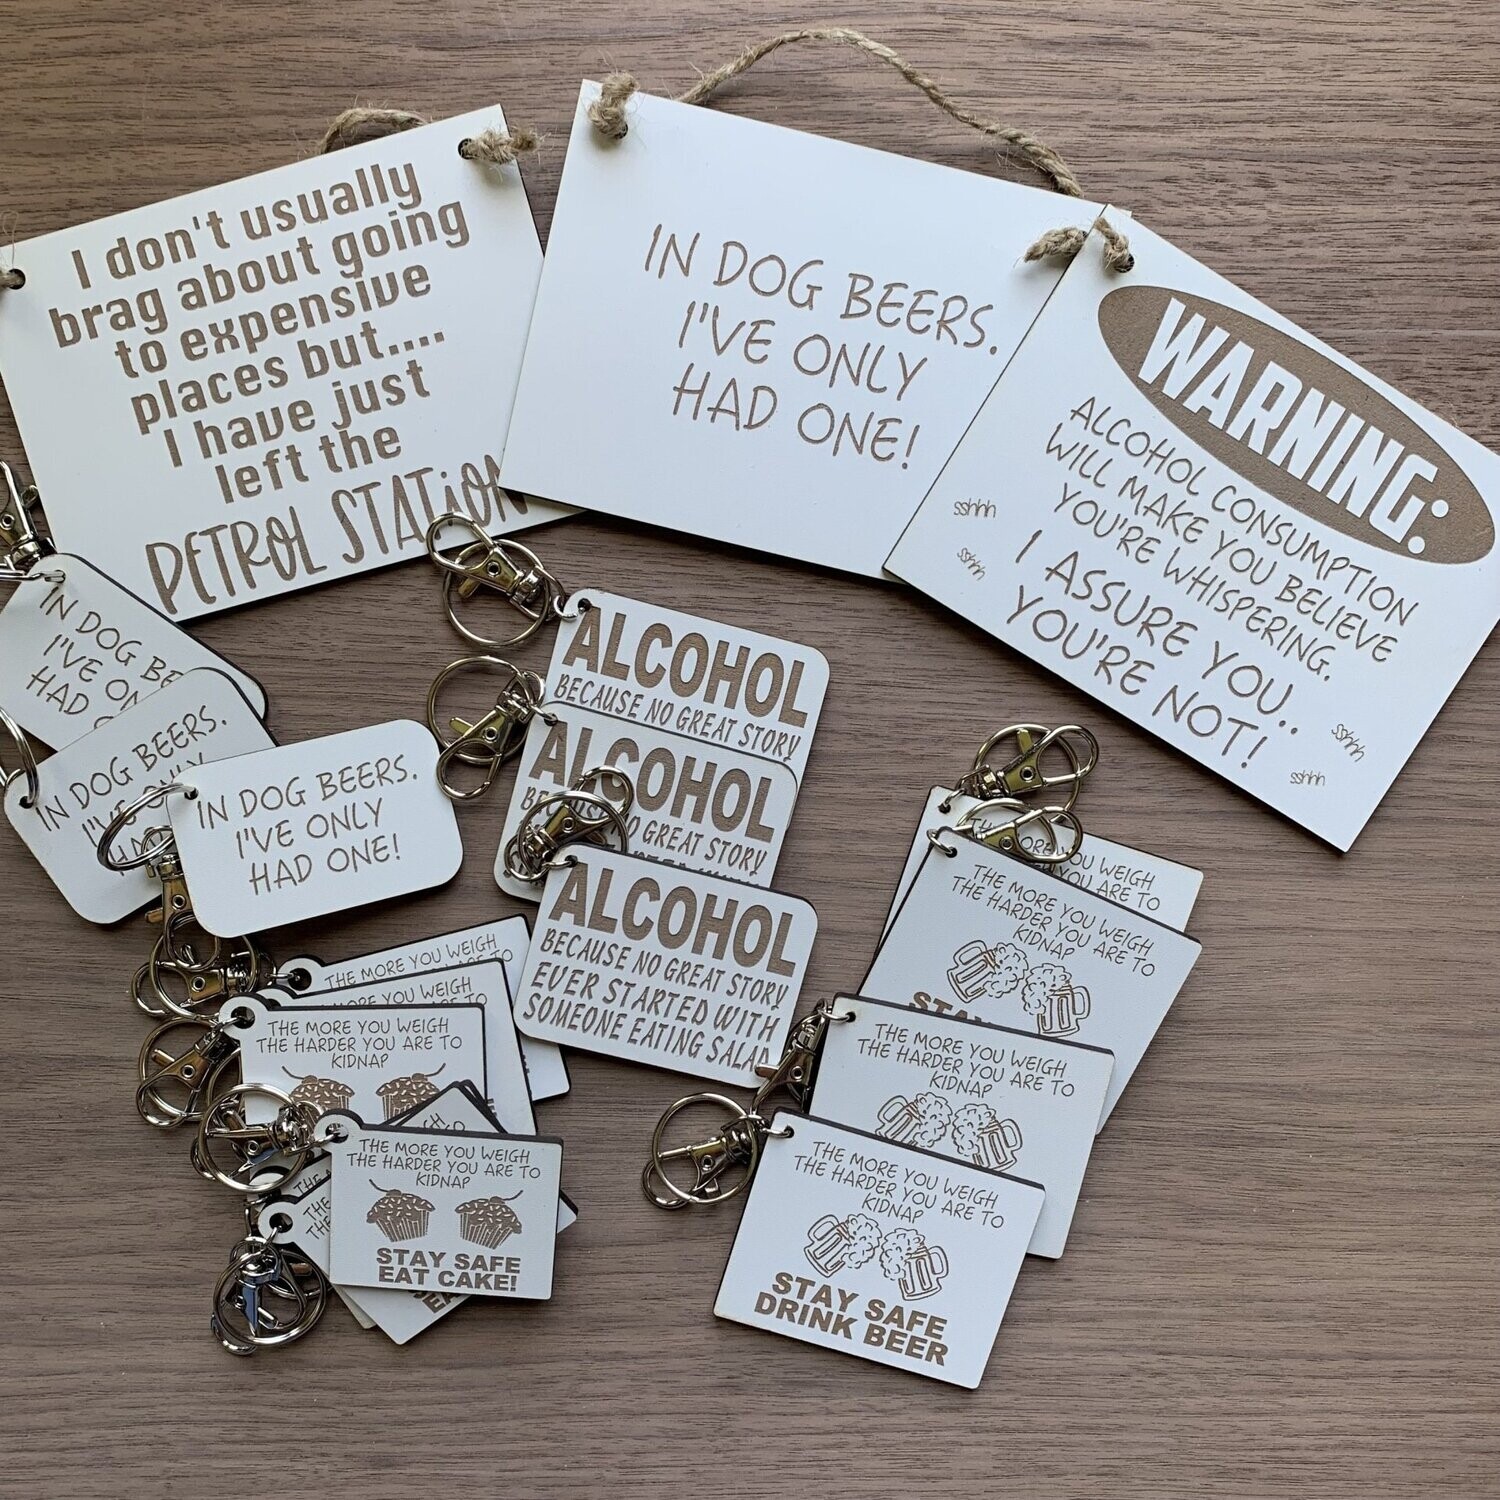 Funny Quotes, Key rings / Plaques